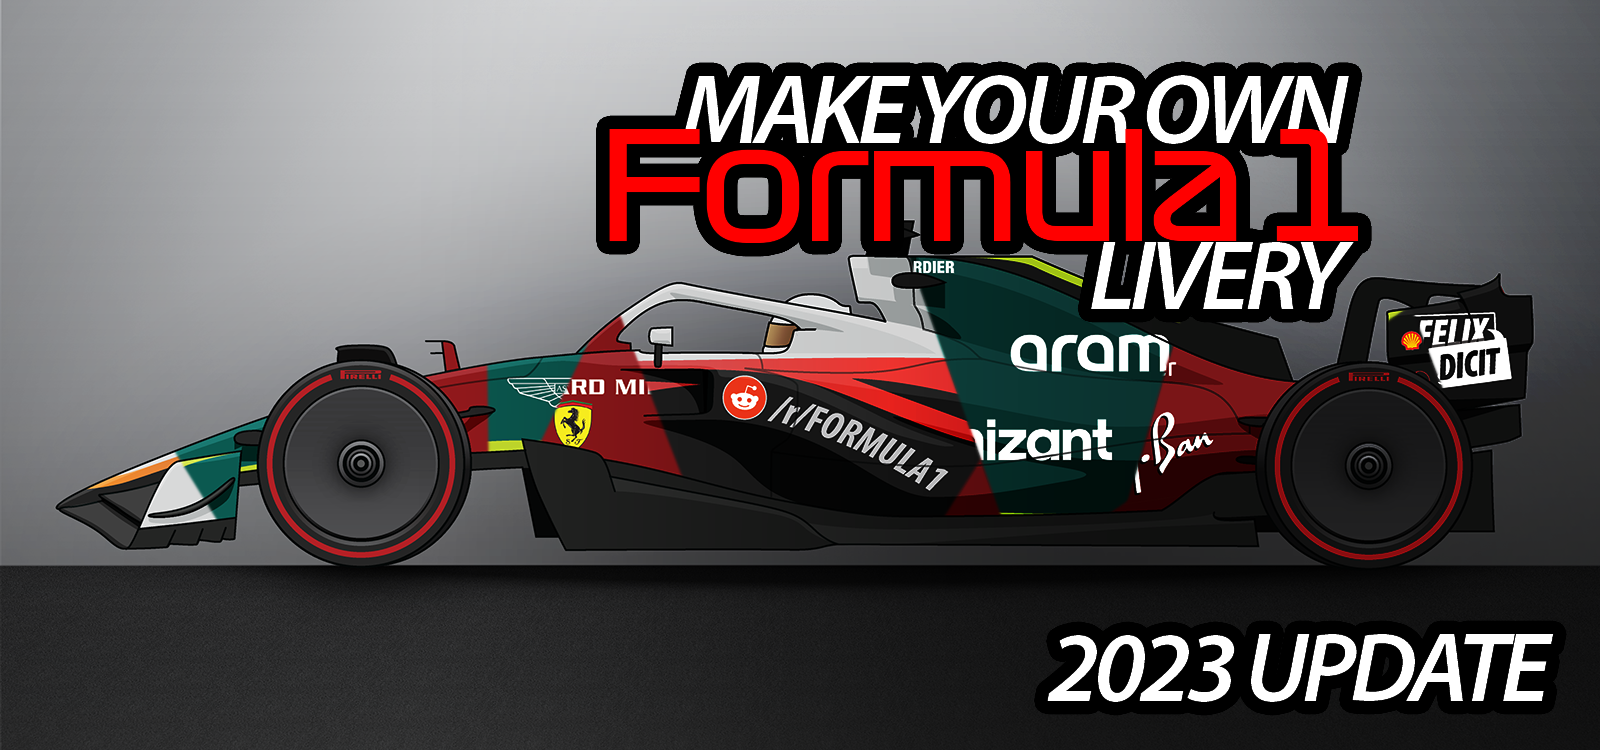 Make your own Formula 1 livery with this free template - 2023 update